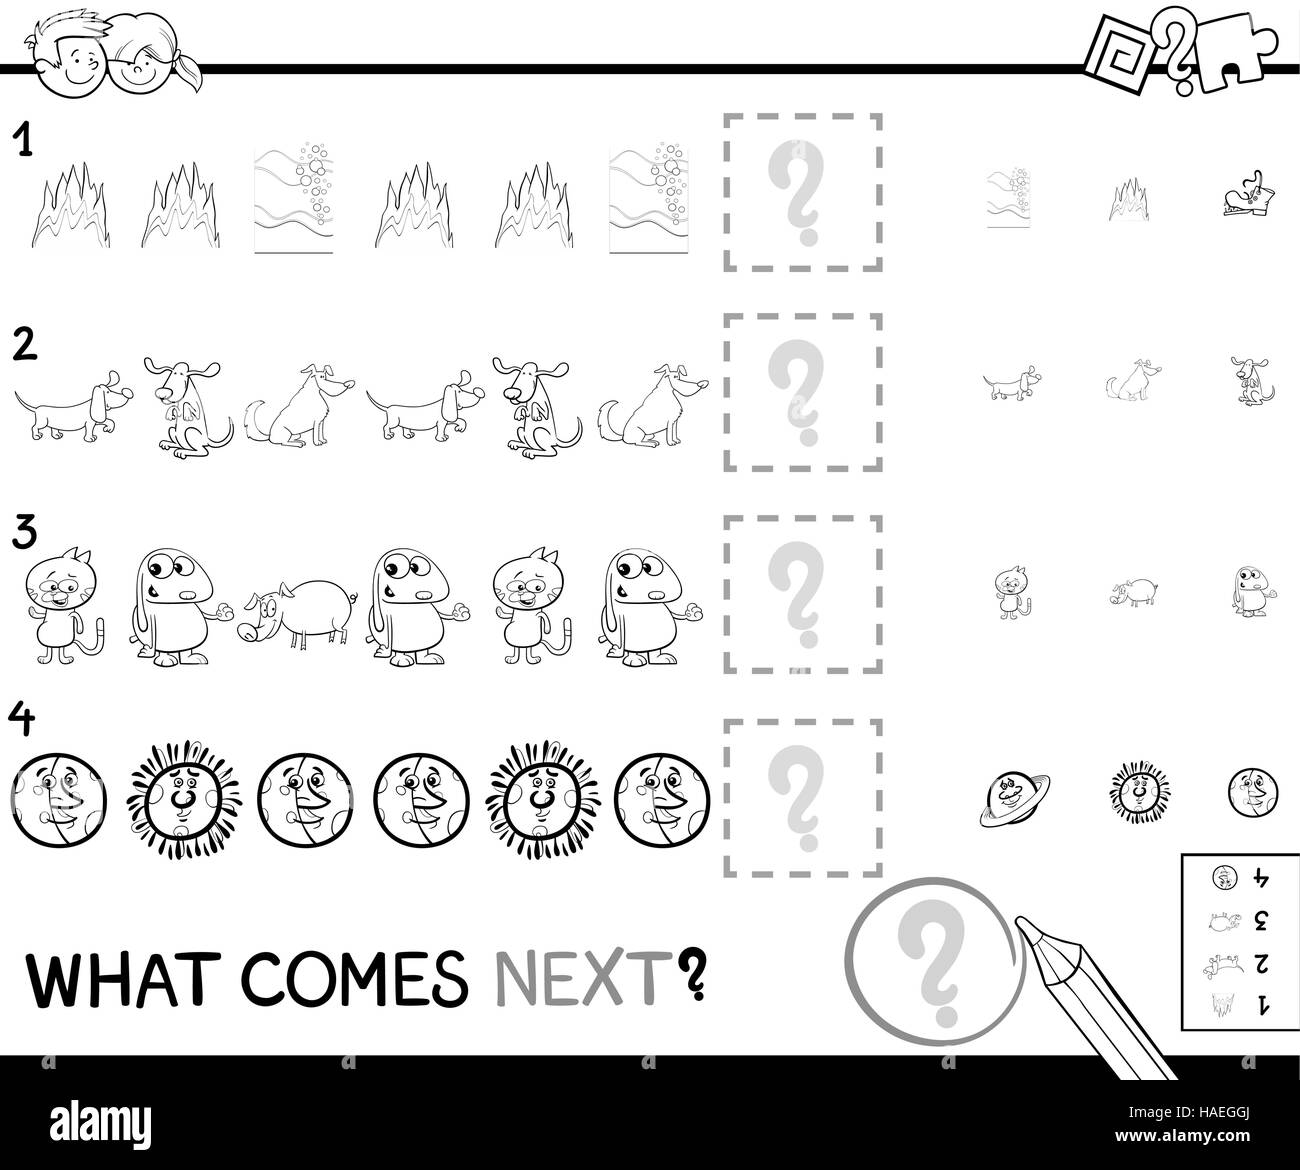 Black and White Cartoon Illustration of Completing the Pattern Educational Activity Game for Children Coloring Book Stock Vector